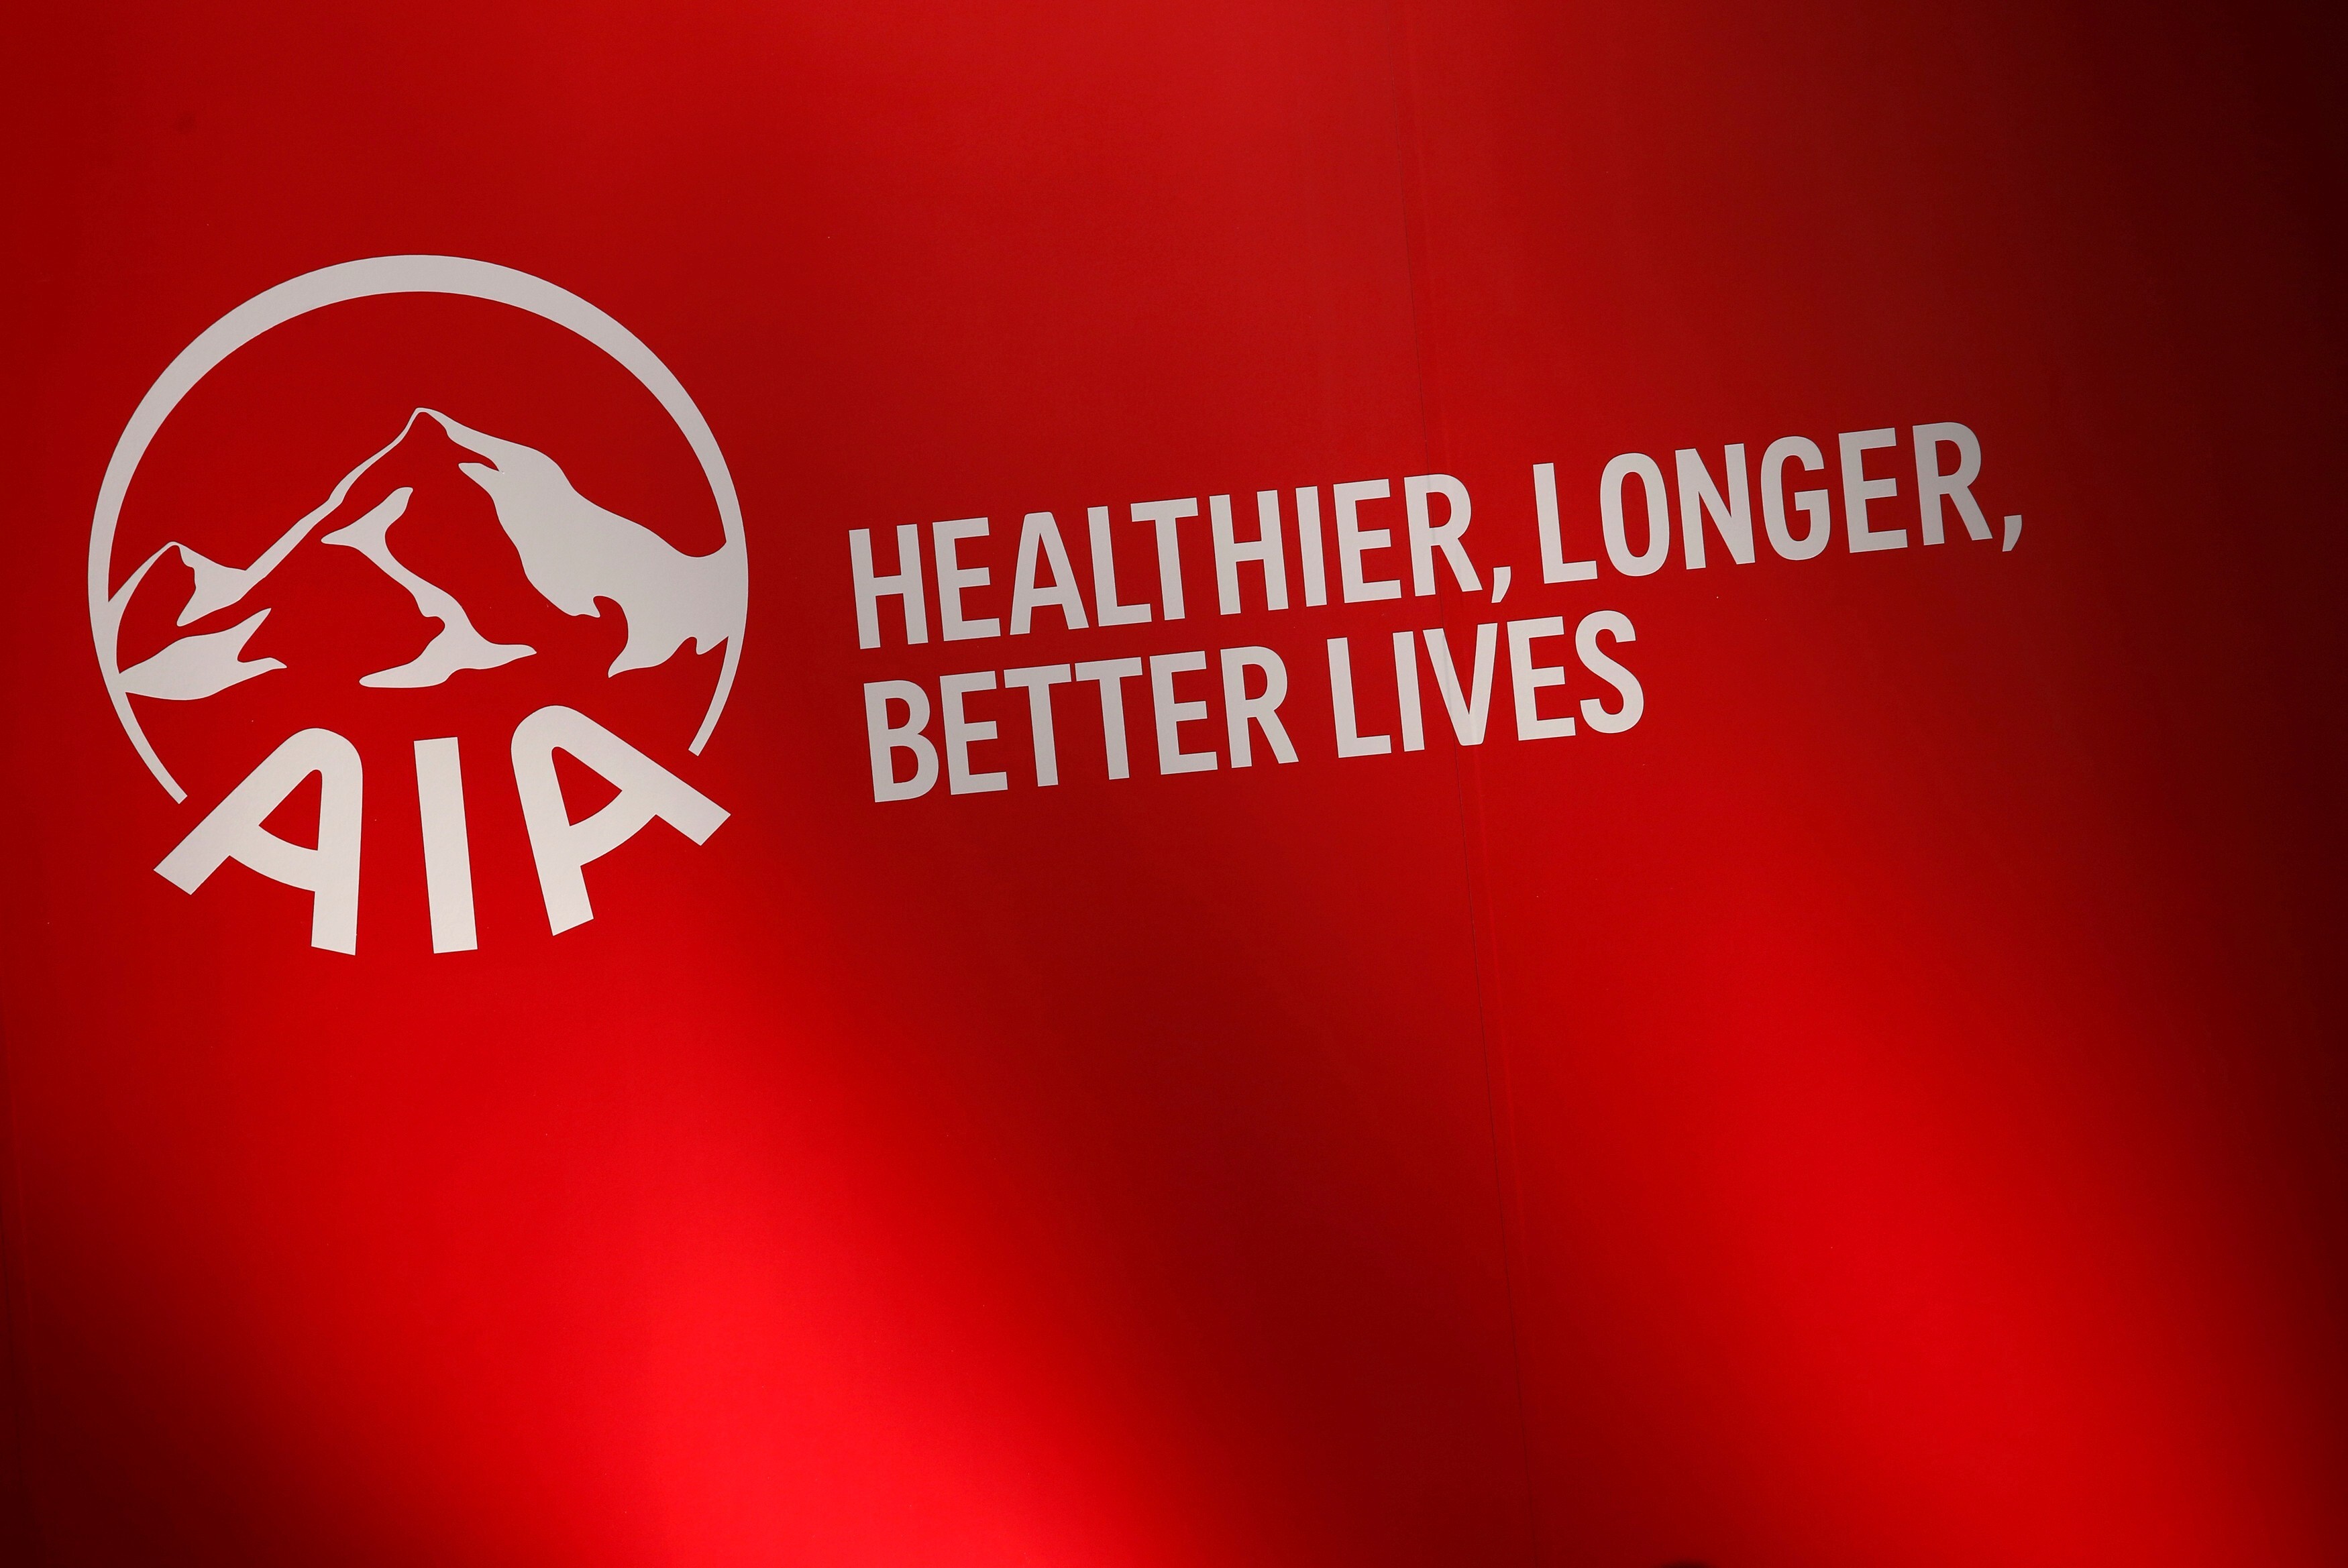 AIA Group’s first-half new policy sales were hit by the coronavirus pandemic. Photo: Reuters